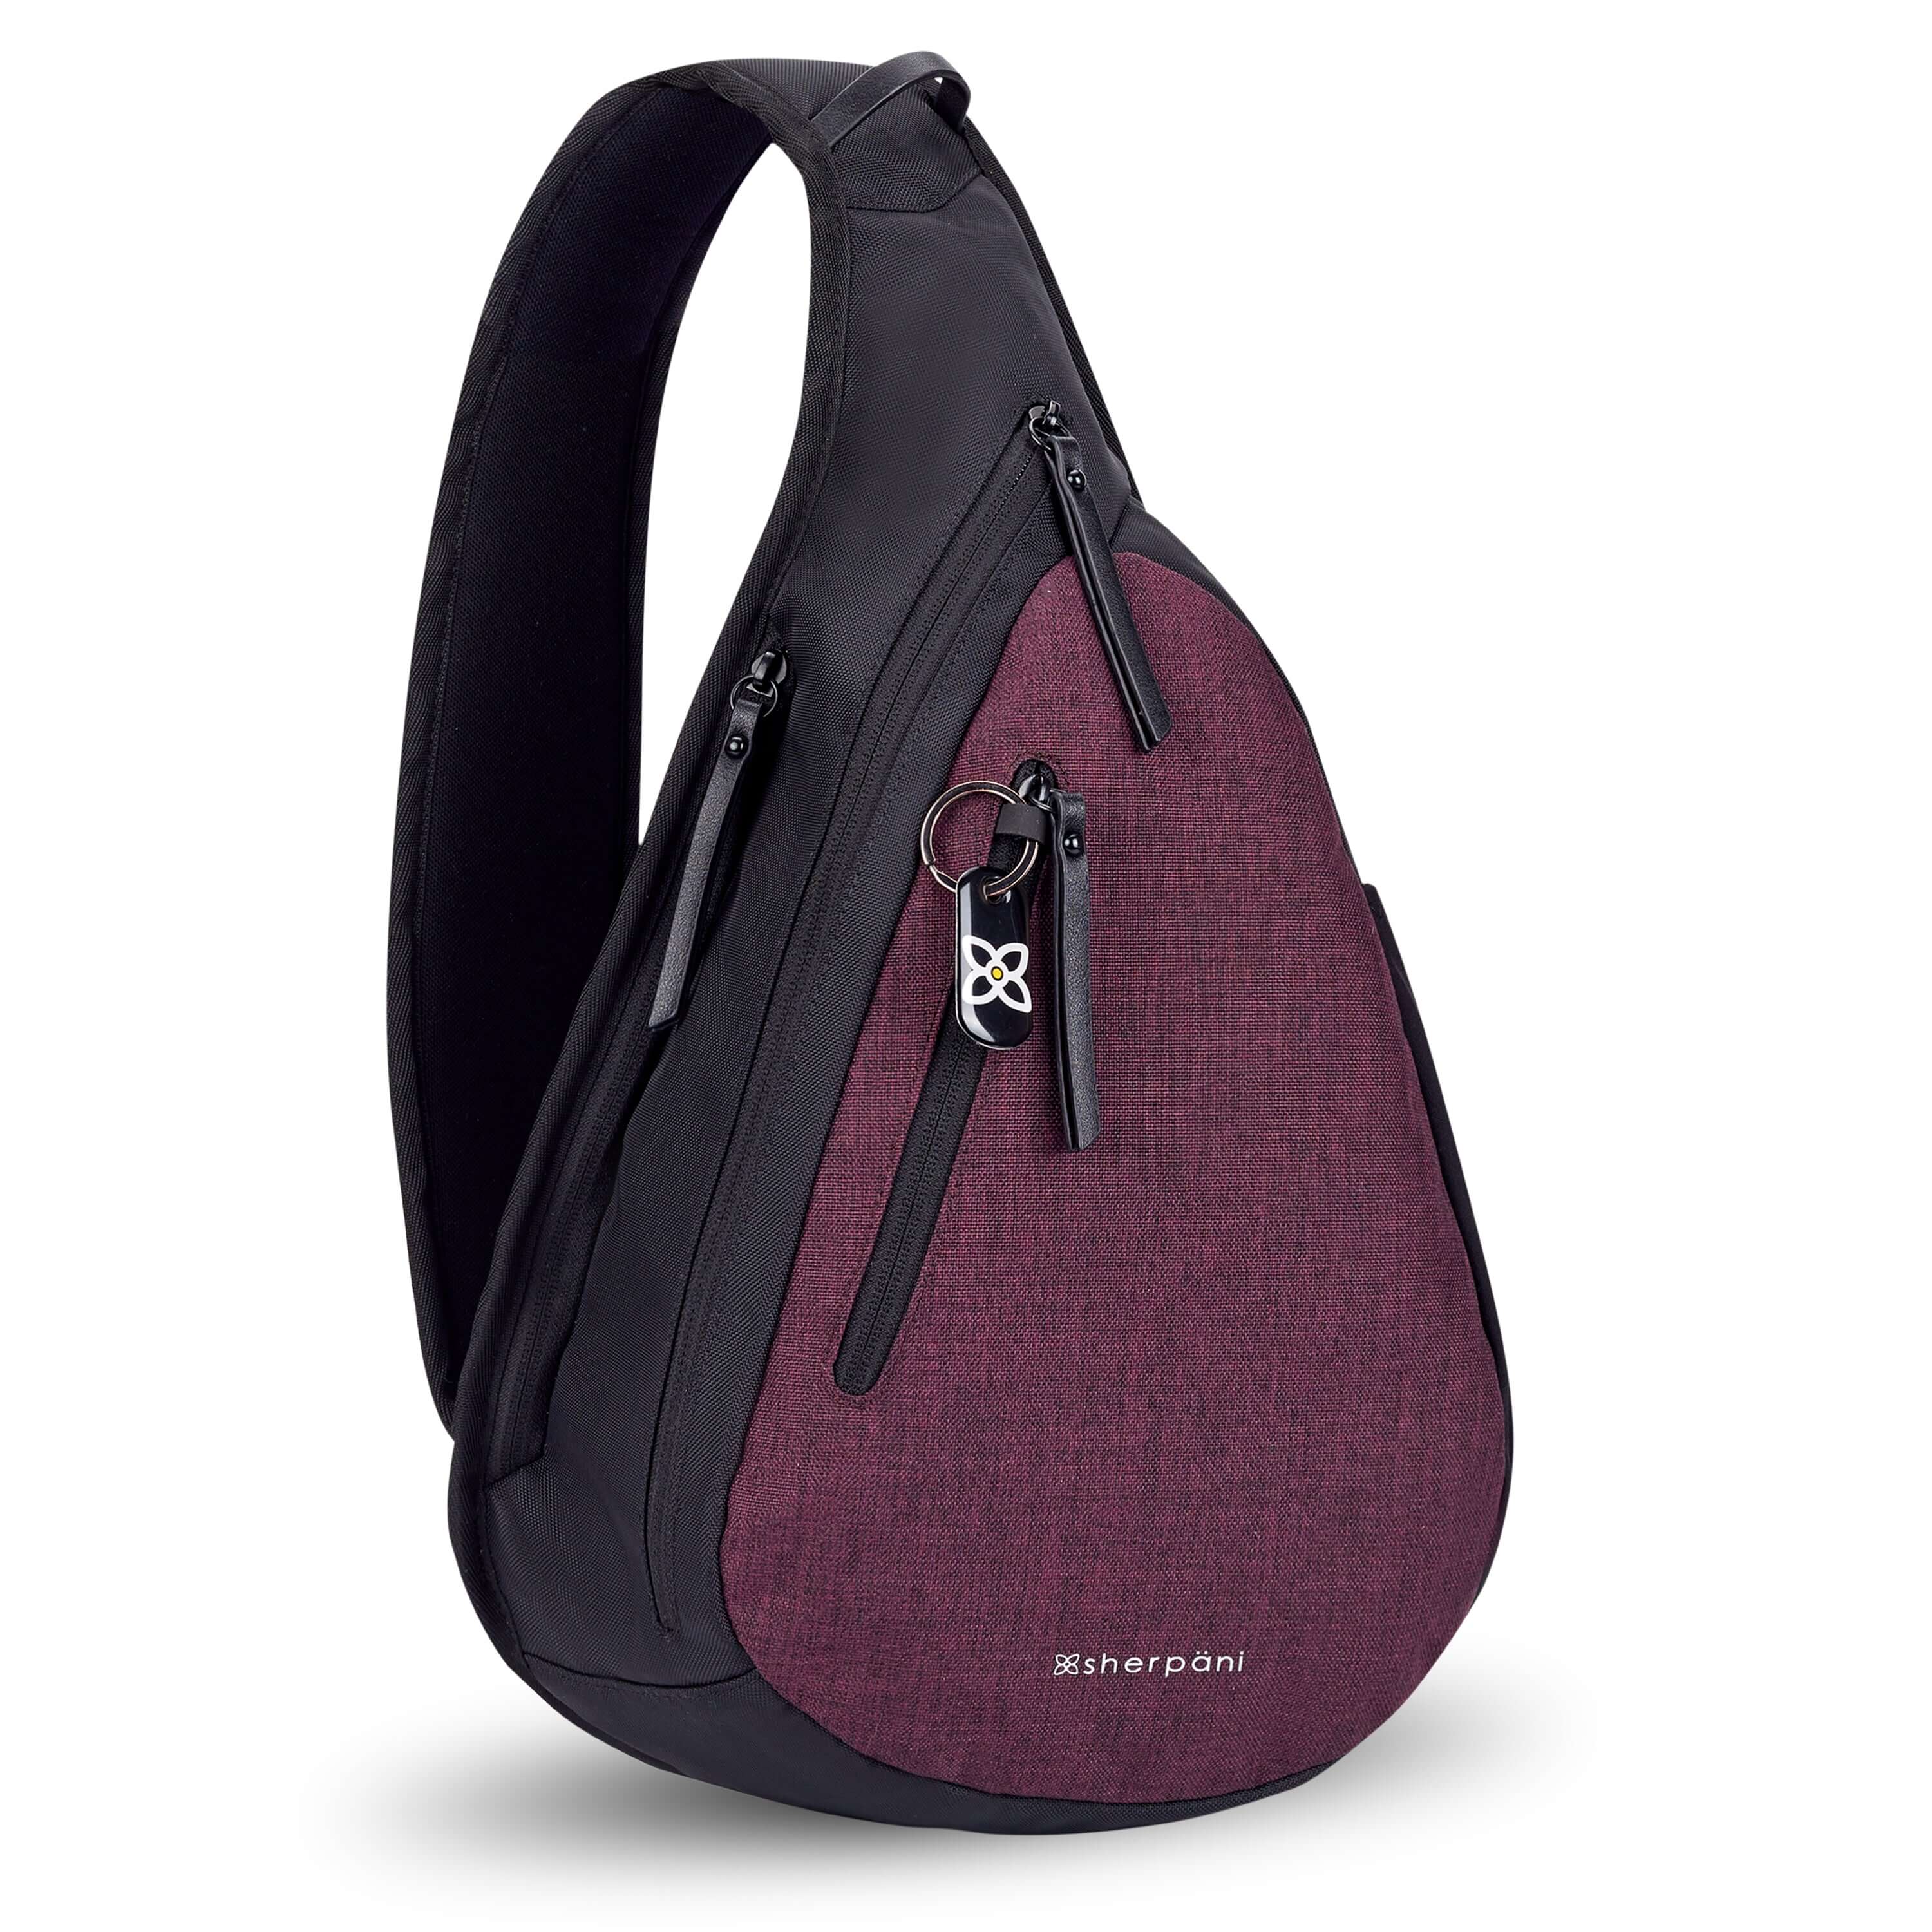  Angled front view of Sherpani's Anti-Theft bag, the Esprit AT in Merlot, with vegan leather accents in black. There is a locking zipper compartment on the front, and two more zipper compartments on the side. An elastic water bottle holder sits on the other side of the bag.